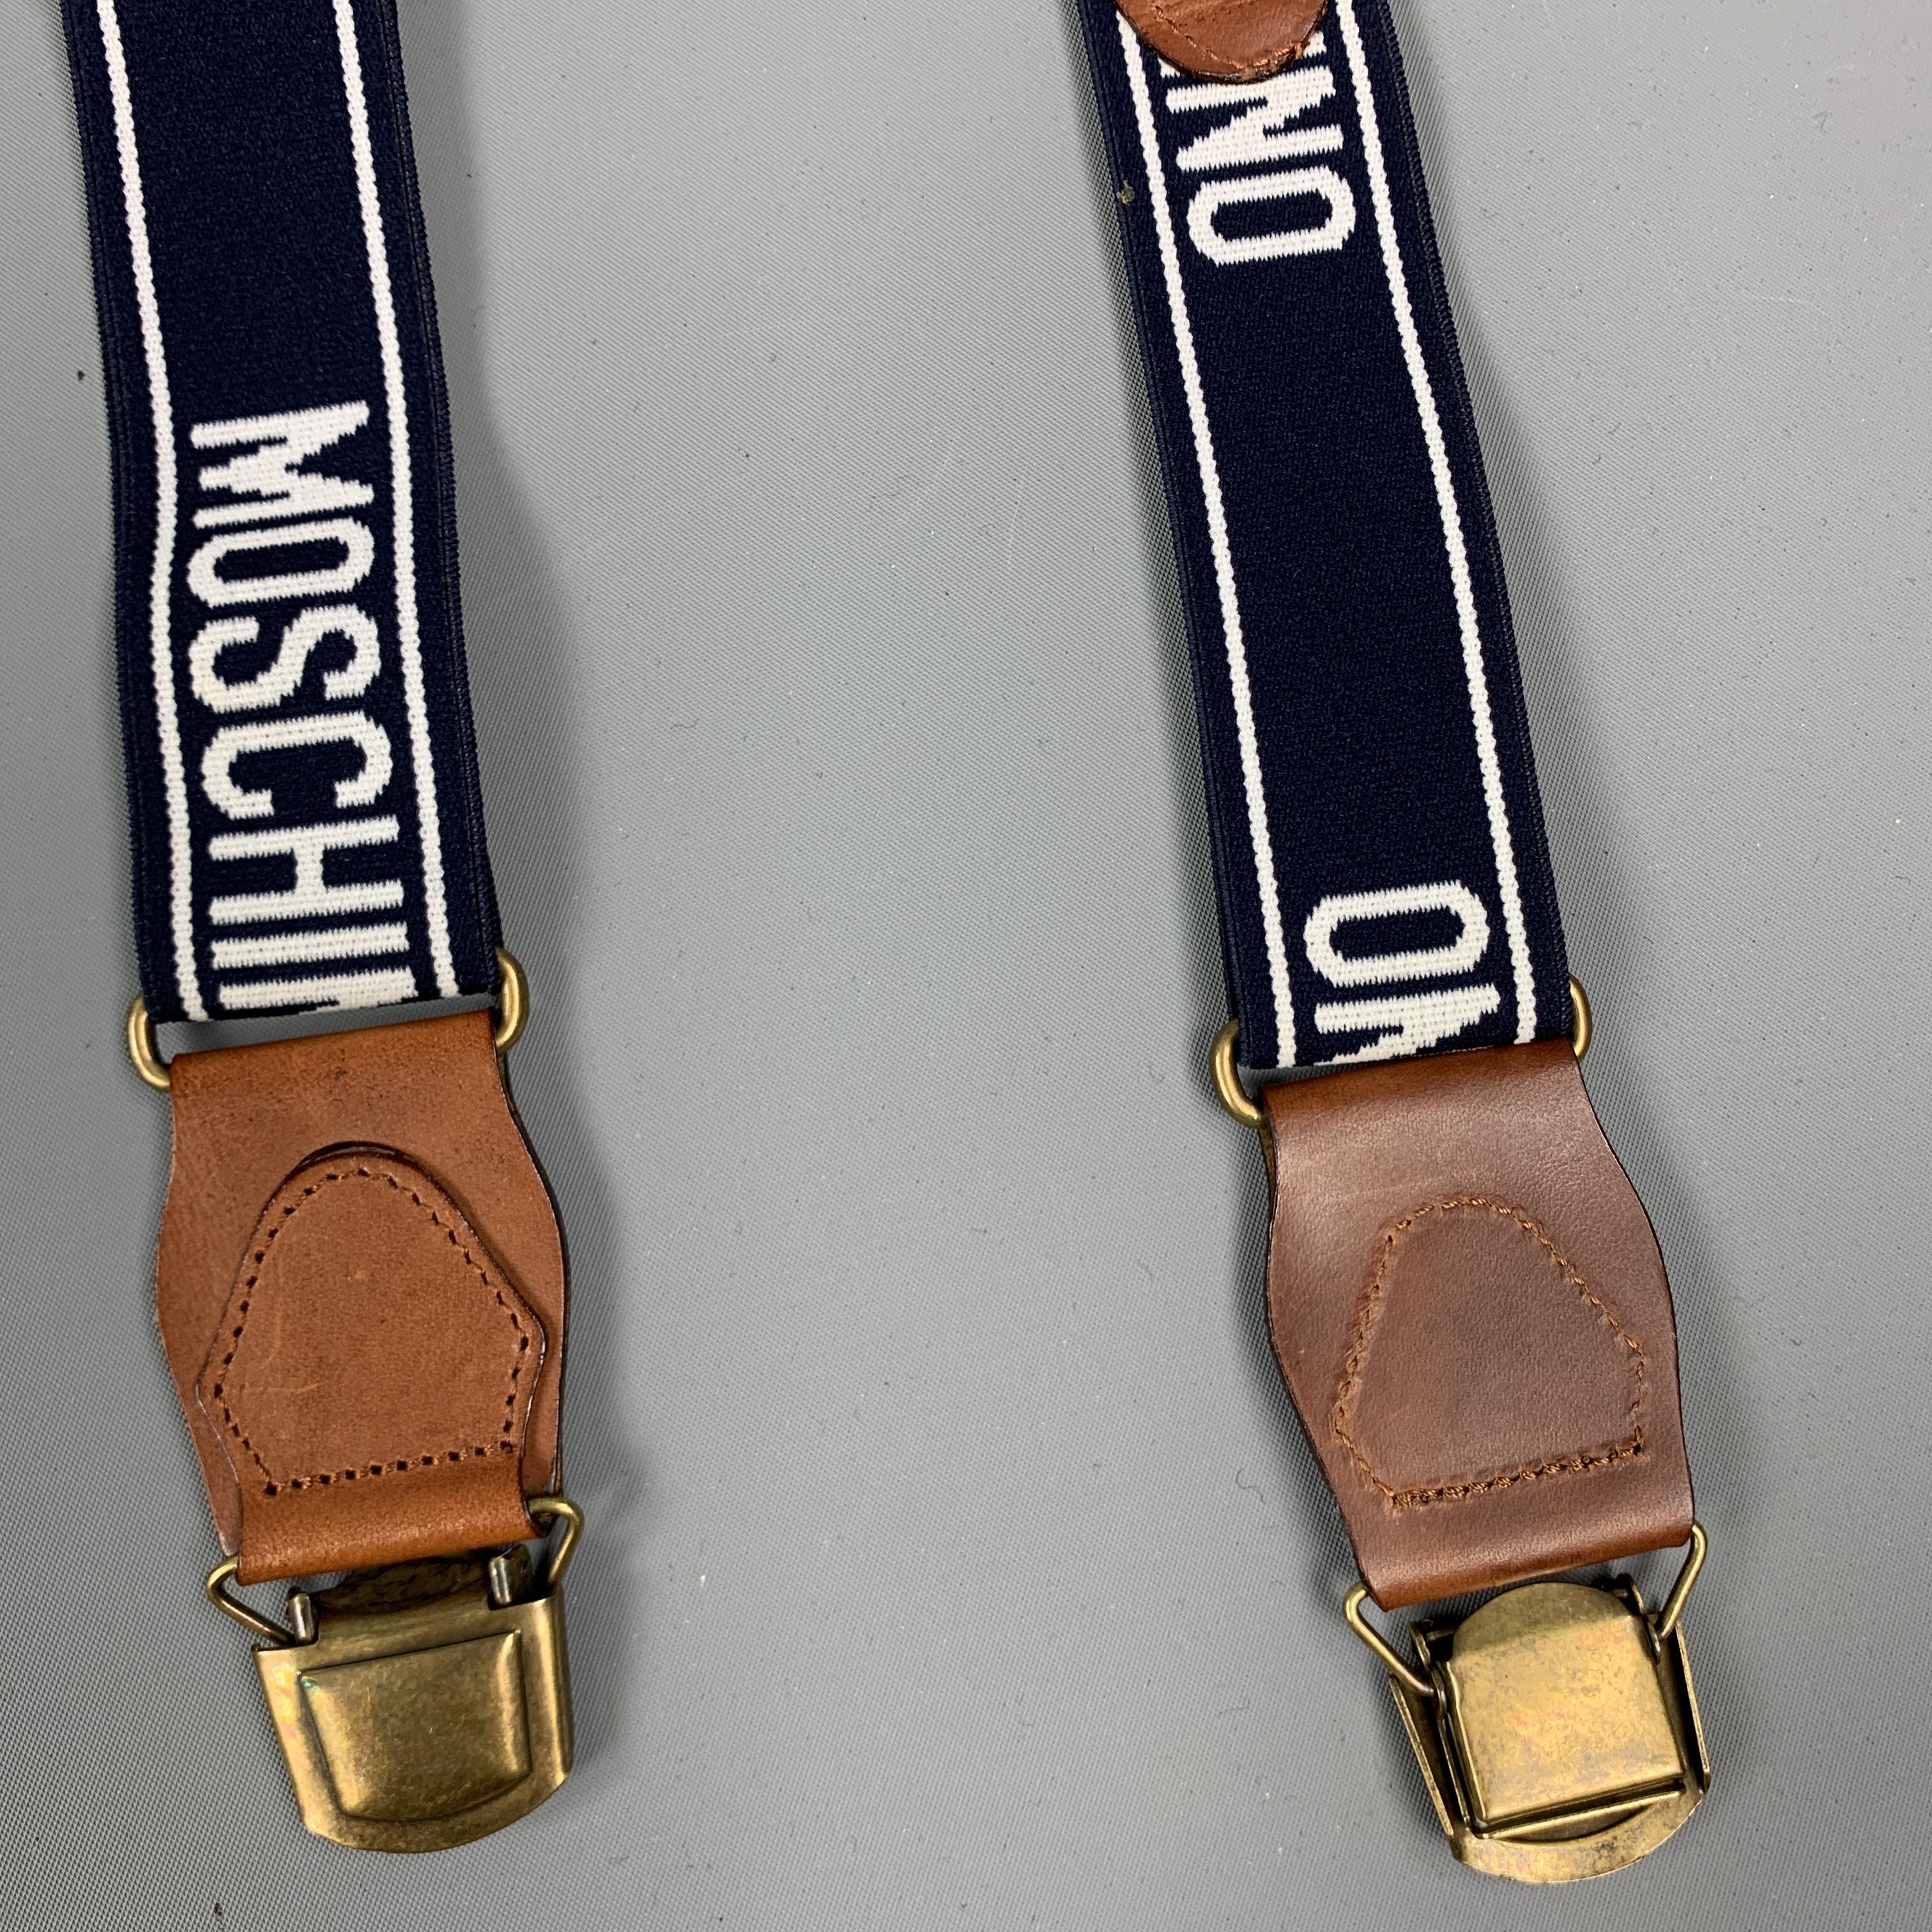 Vintage MOSCHINO JEANS suspenders feature logo elastic straps with brown leather clip ends.

Very Good Pre-Owned Condition. 